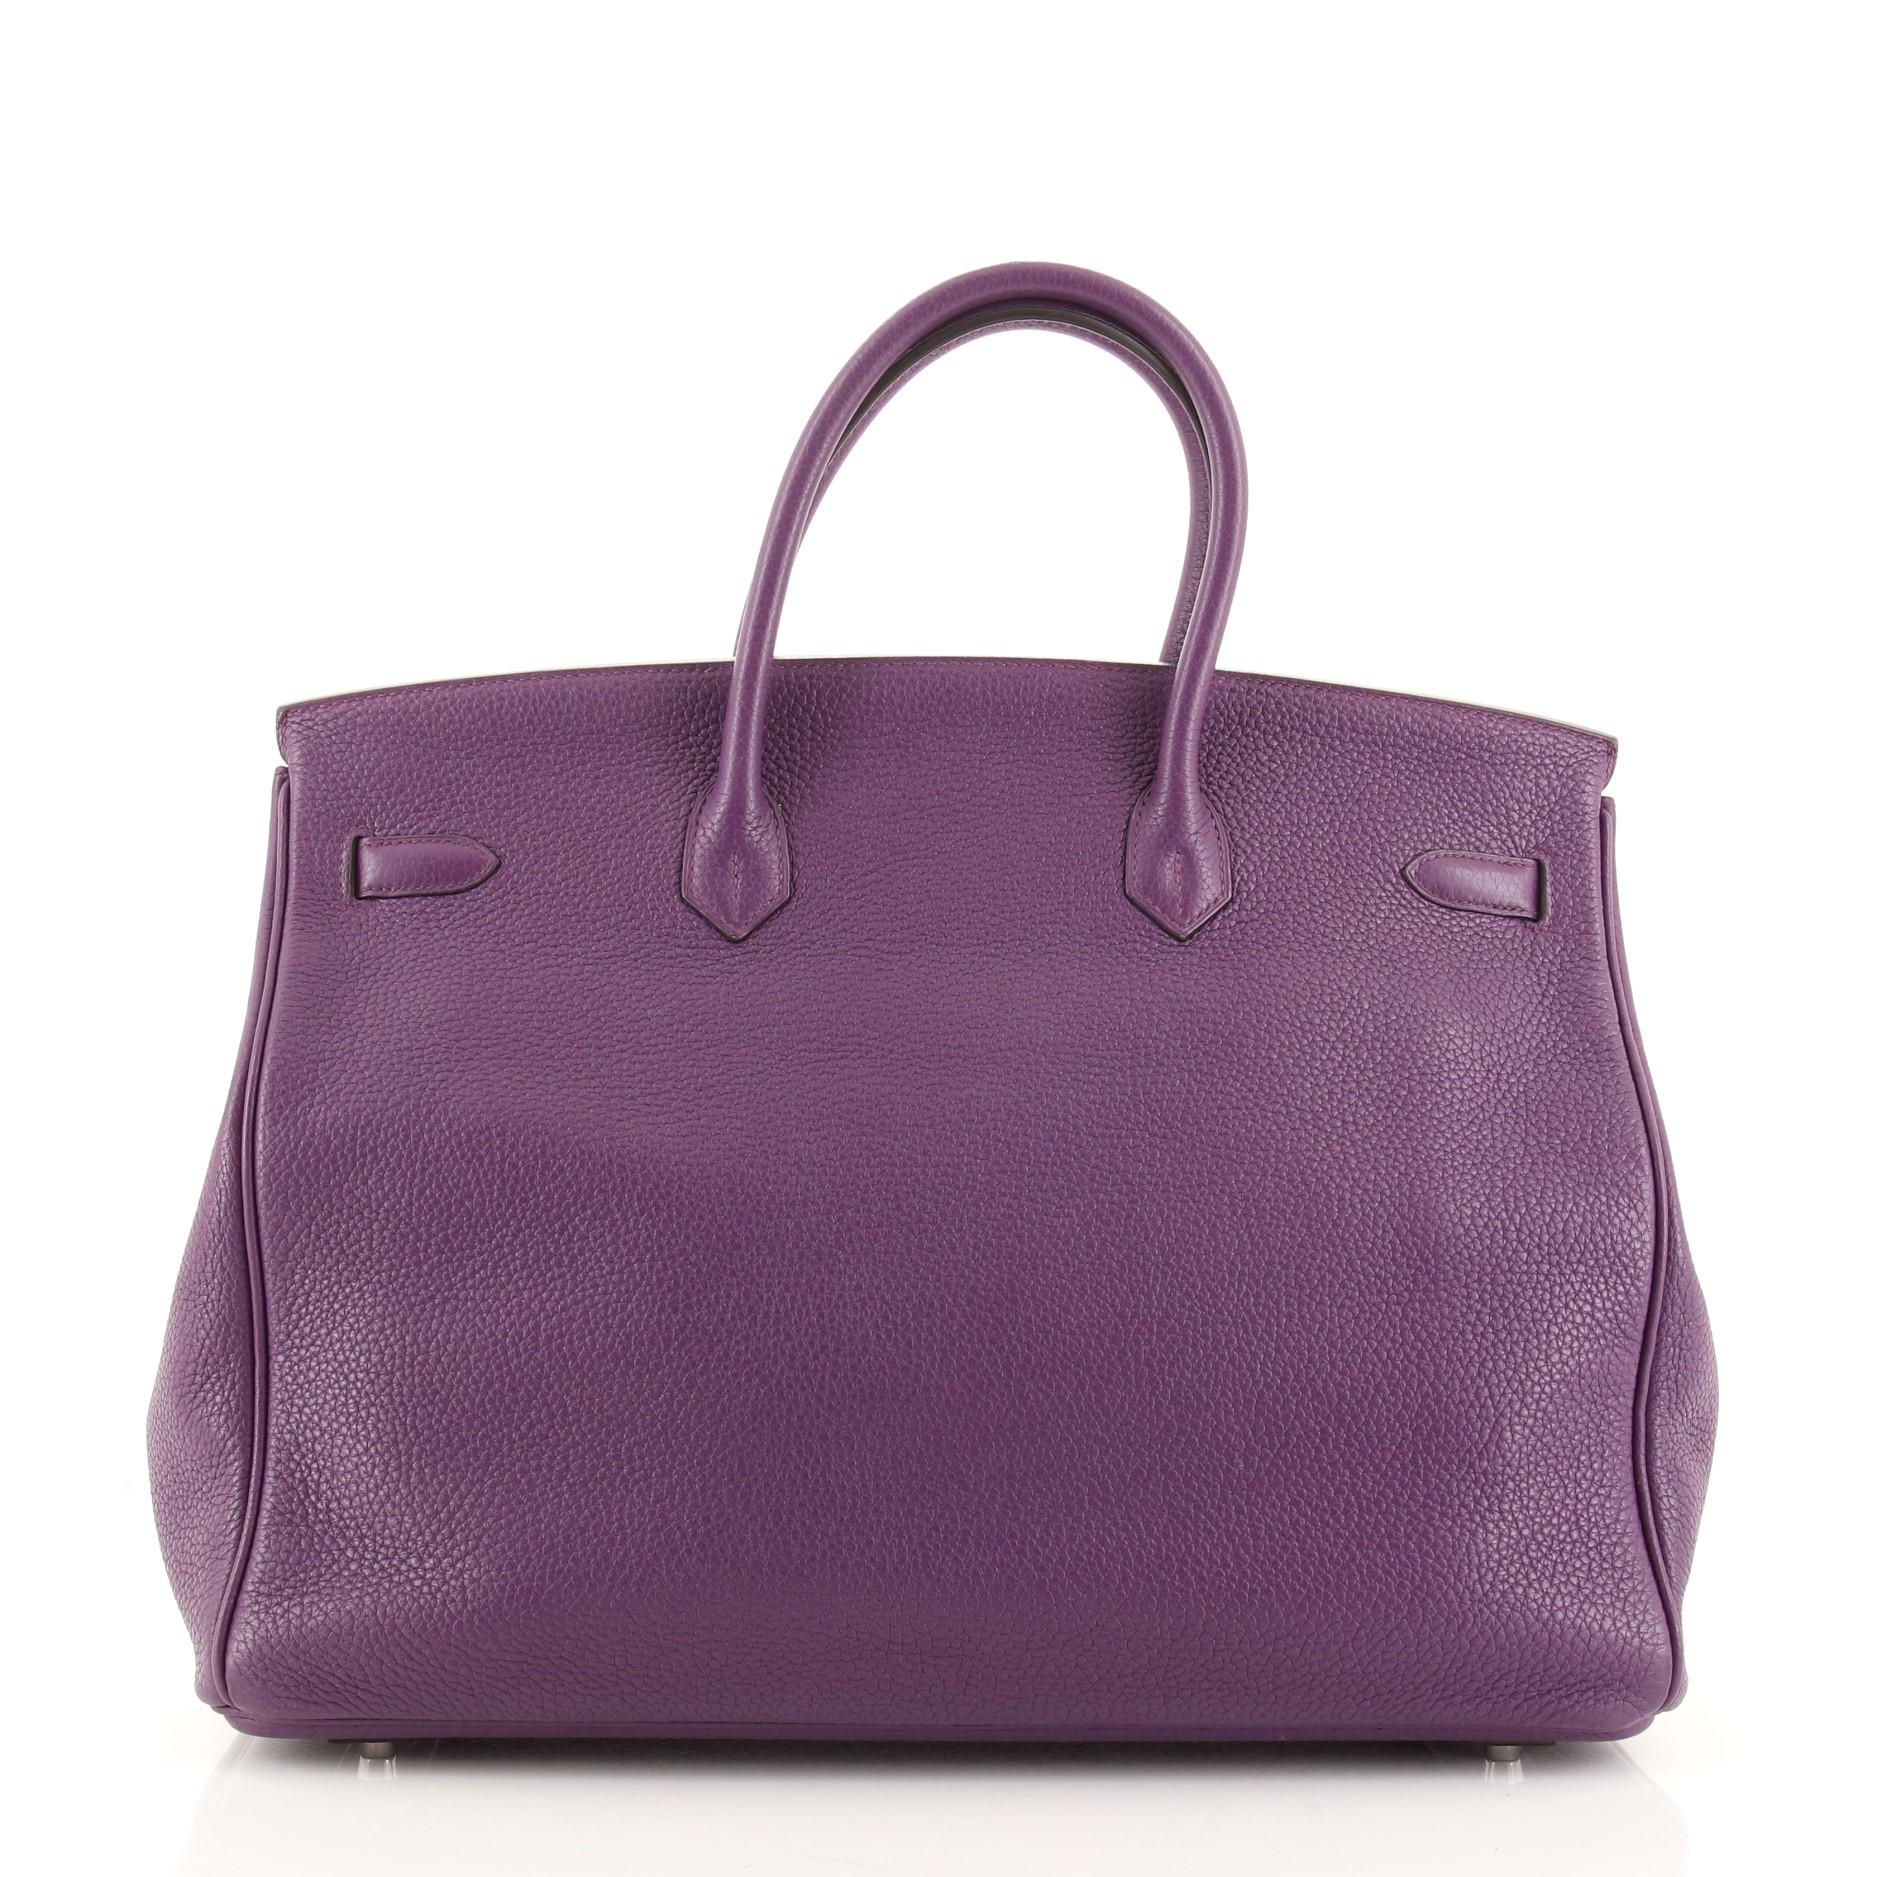 Hermes Birkin Handbag Purple Clemence with Palladium Hardware 40. Loss of shape on exterior and handles. Minor scuffs and indentations on base, splitting on opening wax edge corners, creasing and slight indentions in interior and scuffs on interior